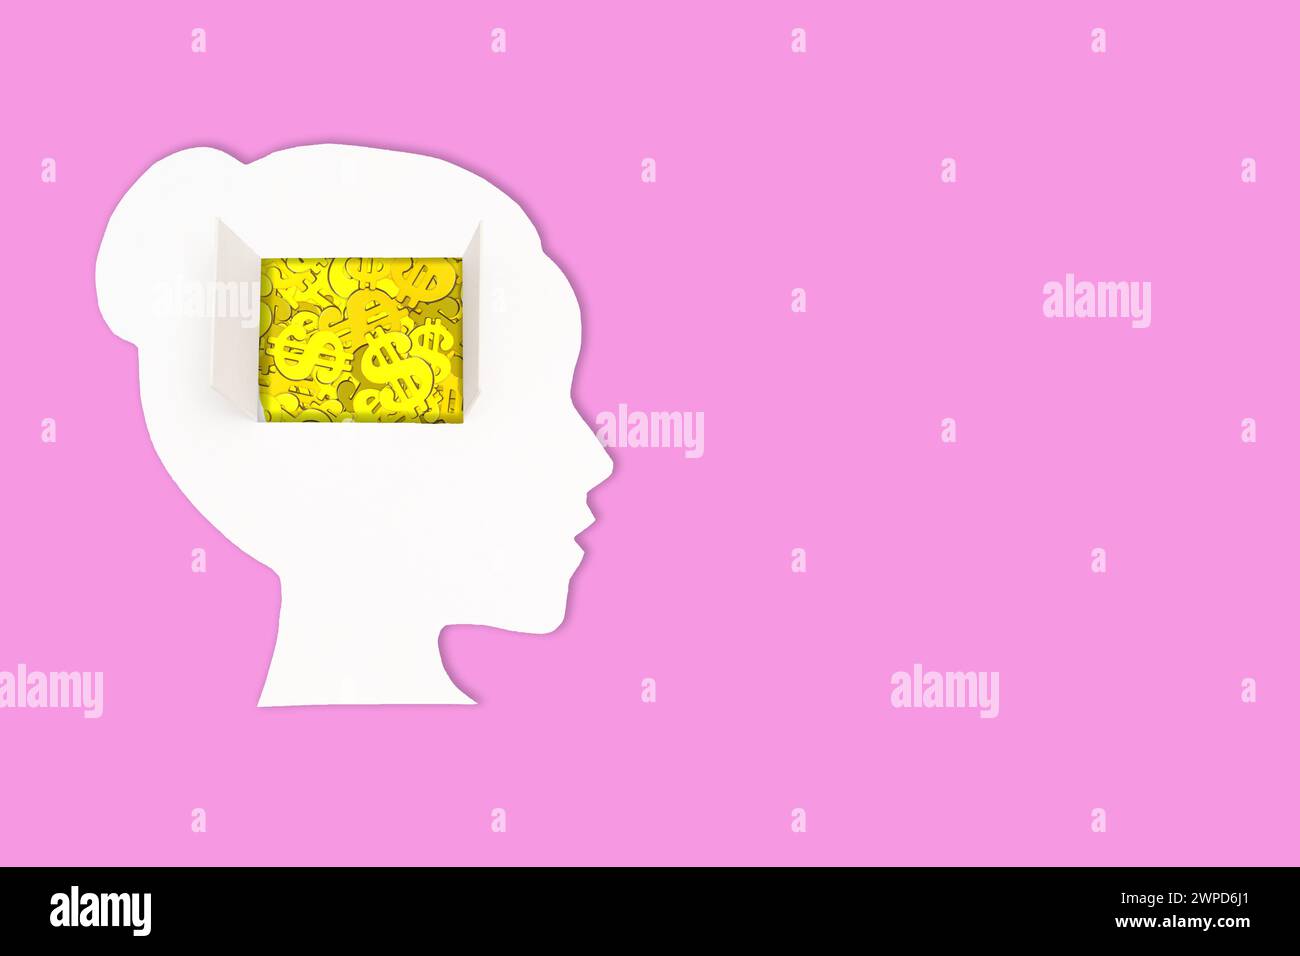 Paper model of a woman's head featuring an open window, revealing a pile of dollar signs instead of the brain. Money mindset related concept. Stock Photo